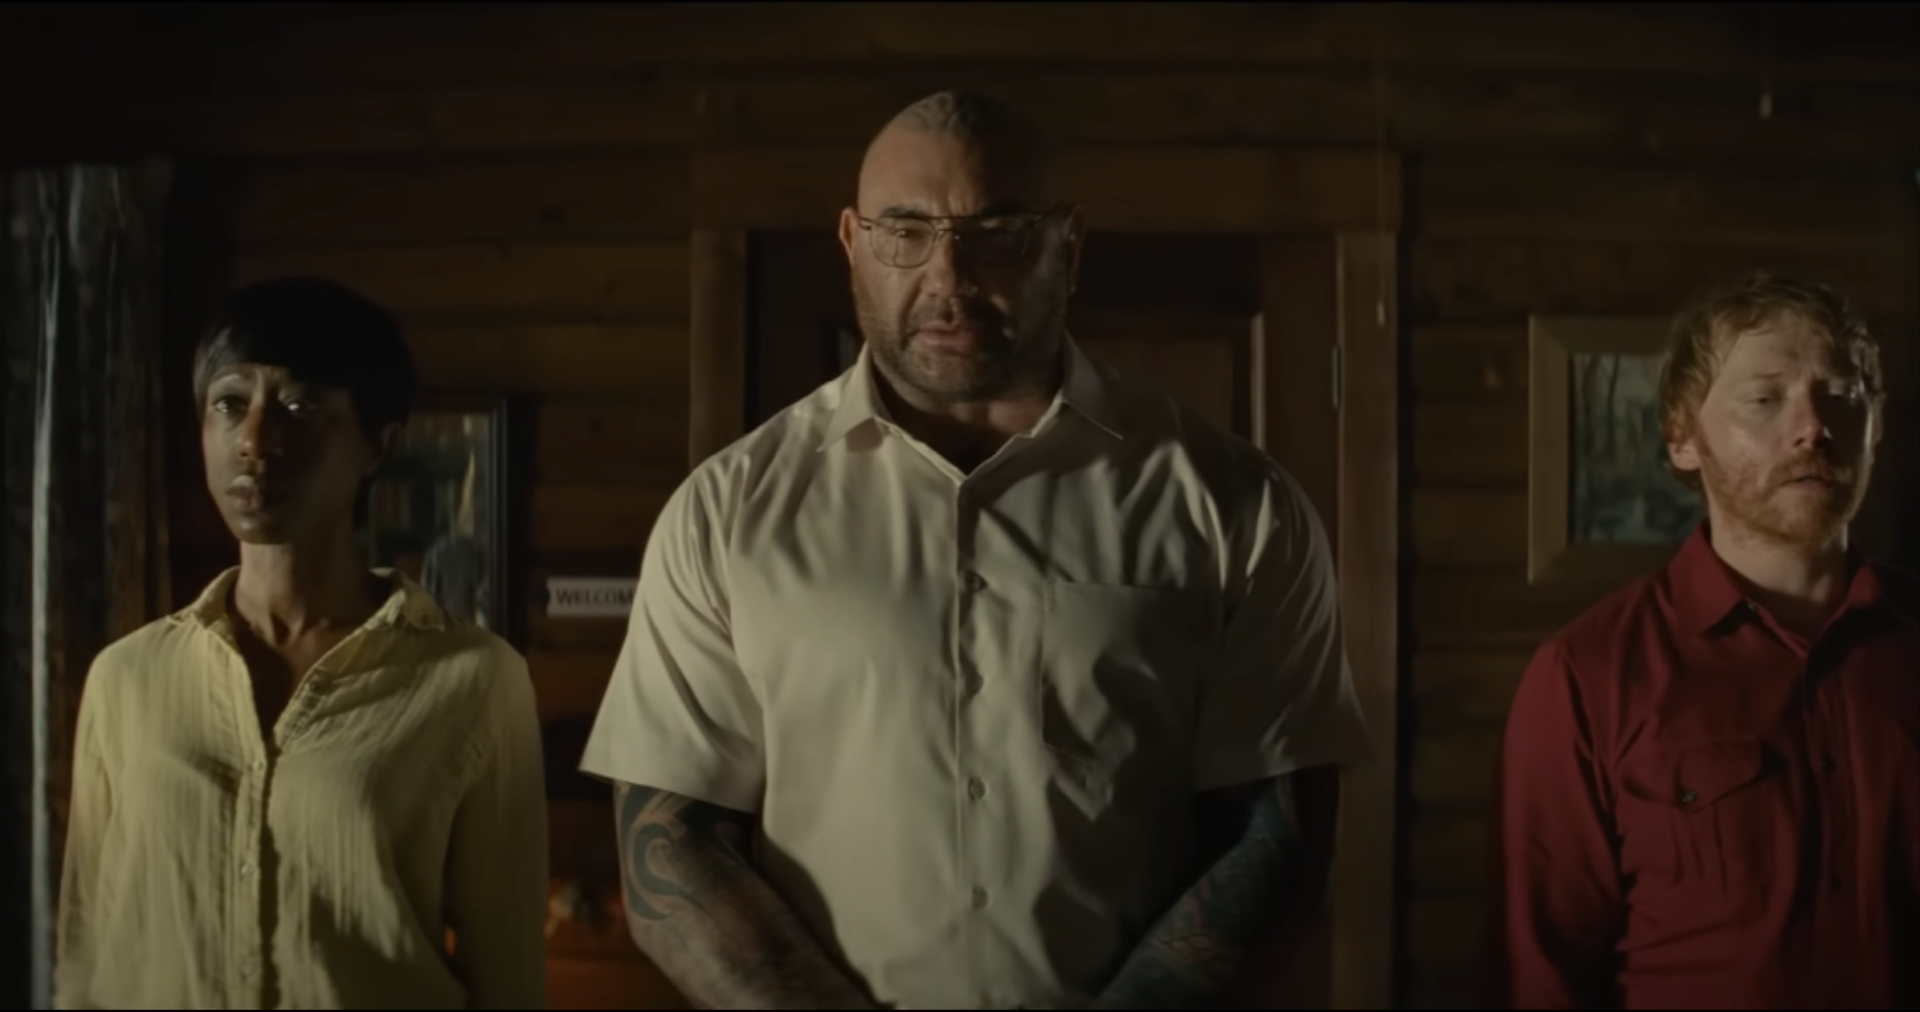 Save your family or save humanity. Make your choice. M. Night Shyamalan reveals his next mind-twisting film 'Knock At The Cabin' starring Dave Bautista, and Rupert Grint.